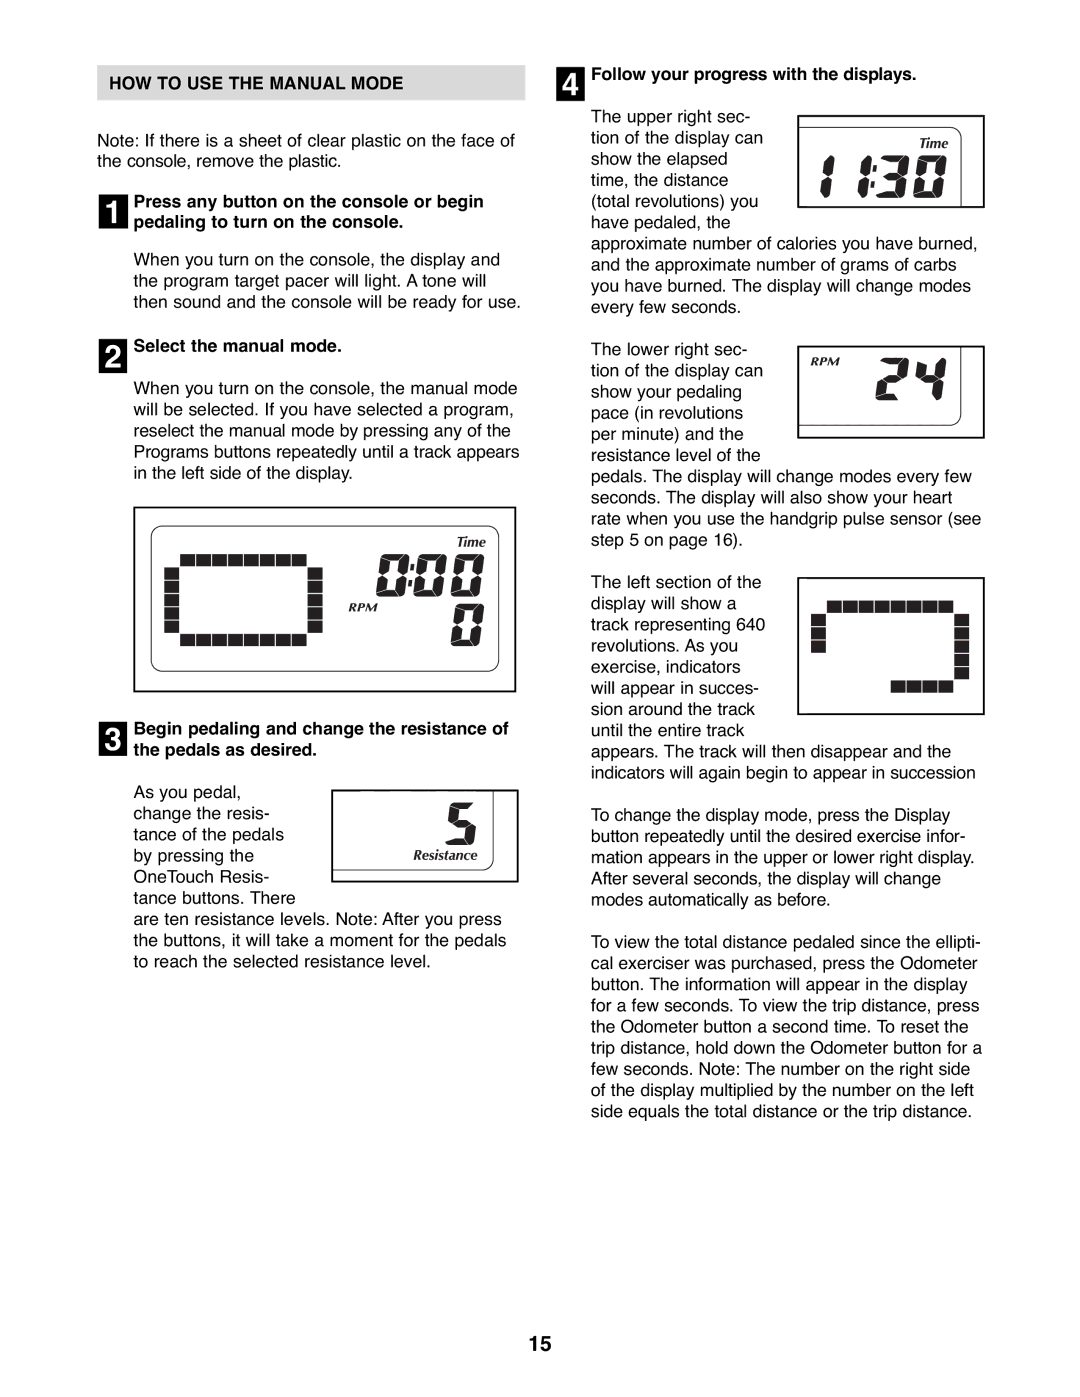 NordicTrack NTEL7506.2 user manual HOW to USE the Manual Mode, Pedaling to turn on the console, Select the manual mode 